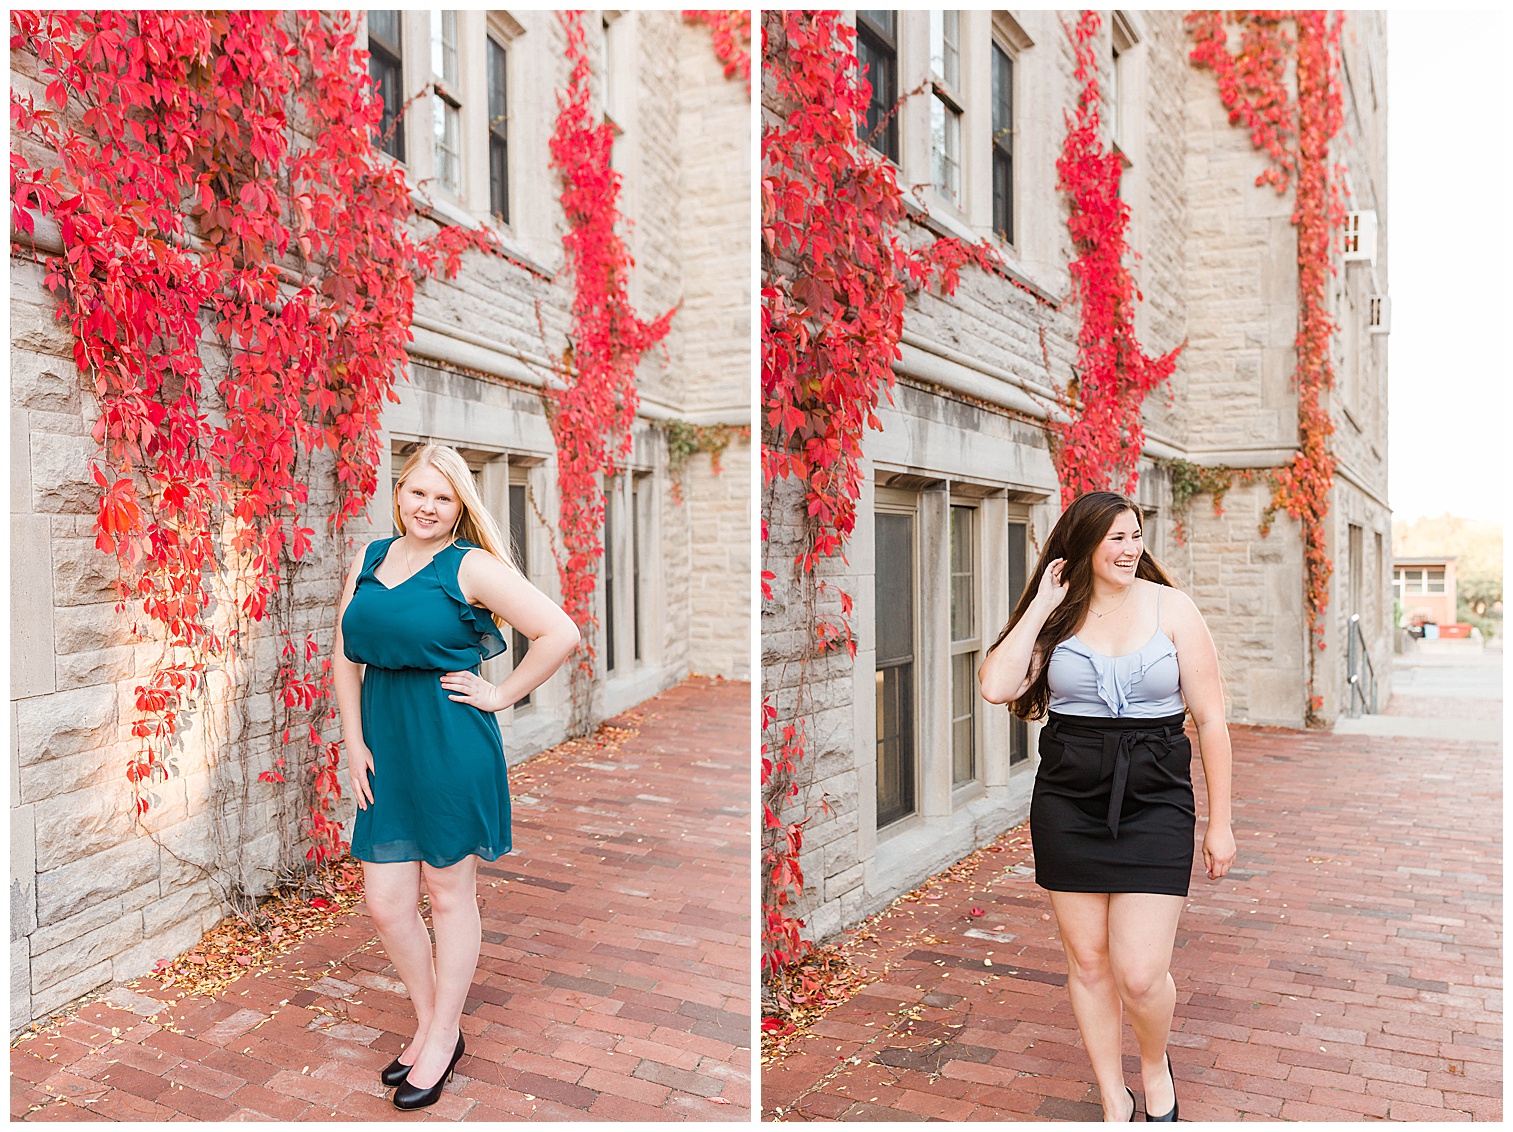 Graduation photos at the University of Guelph with Ariana del Mundo Photography and ADM Gryphon Grads